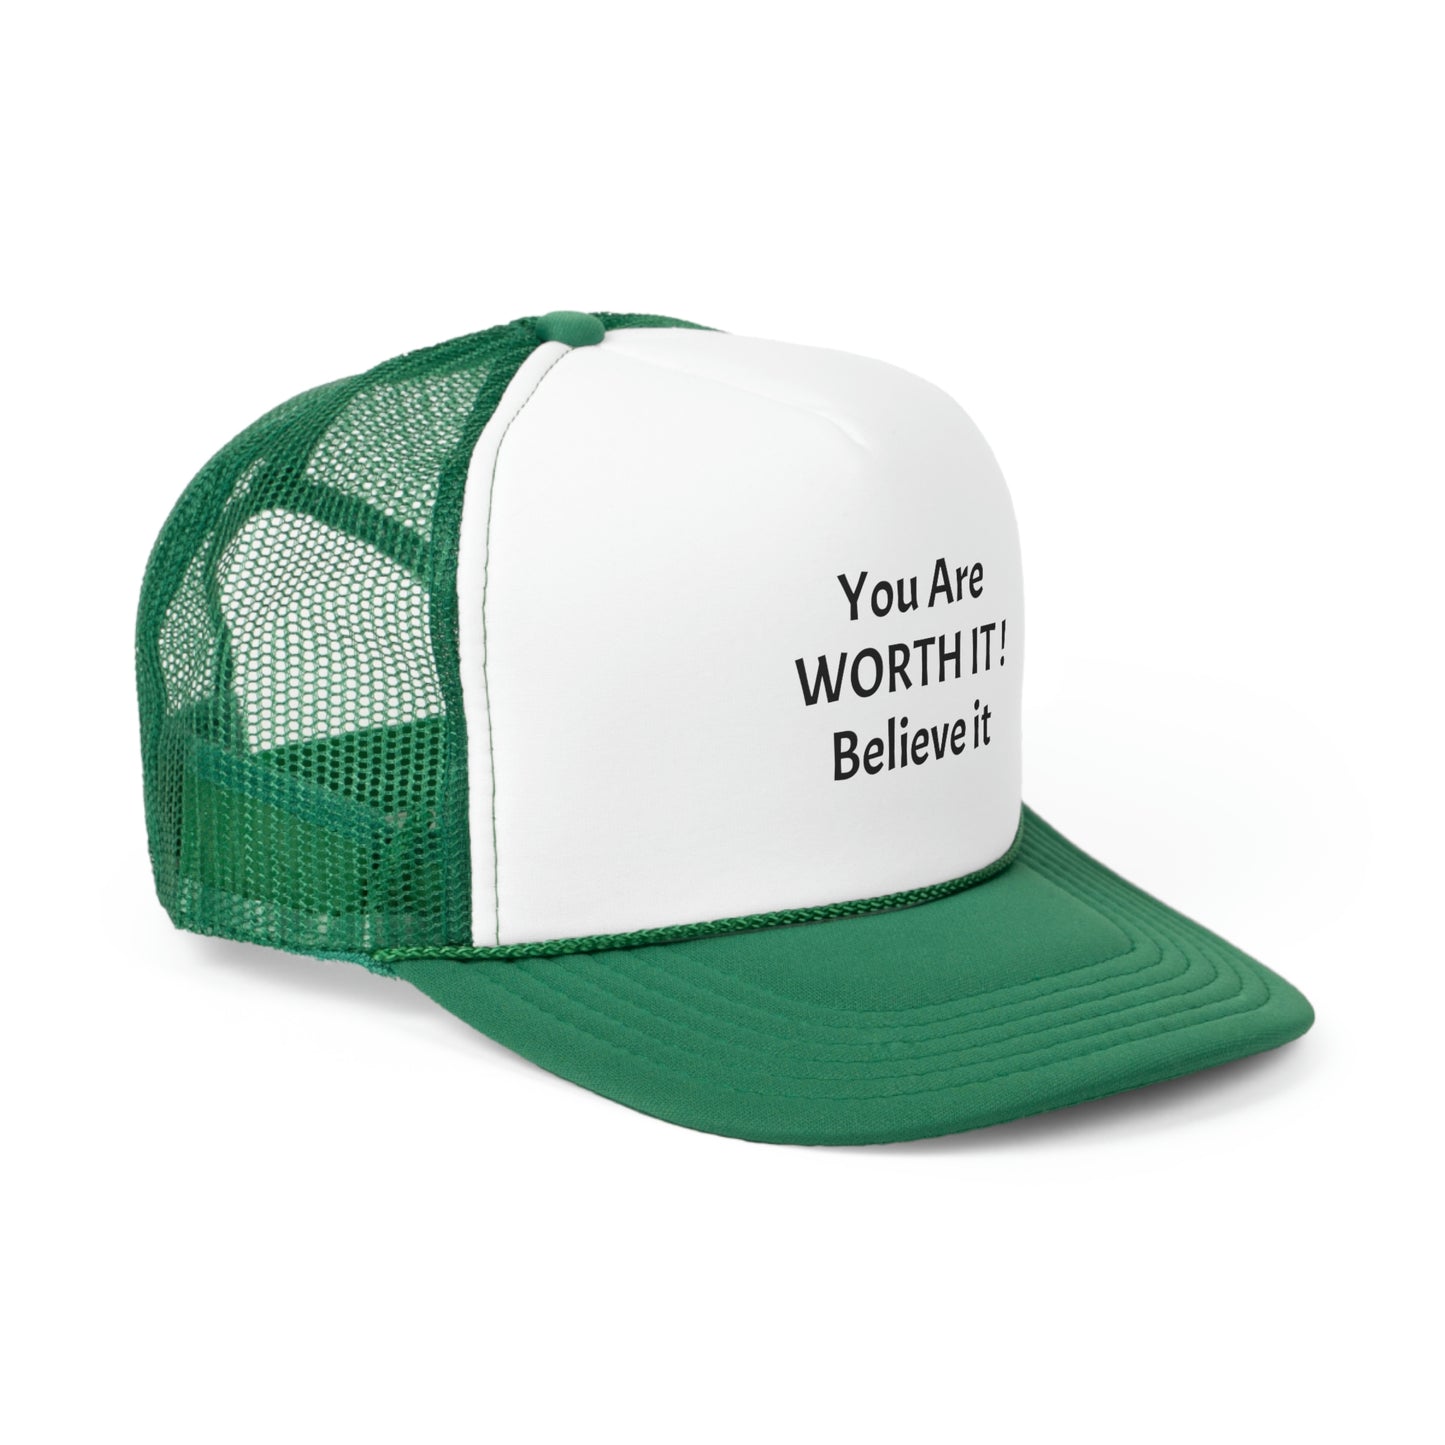 You Are Worth it ! Trucker Caps